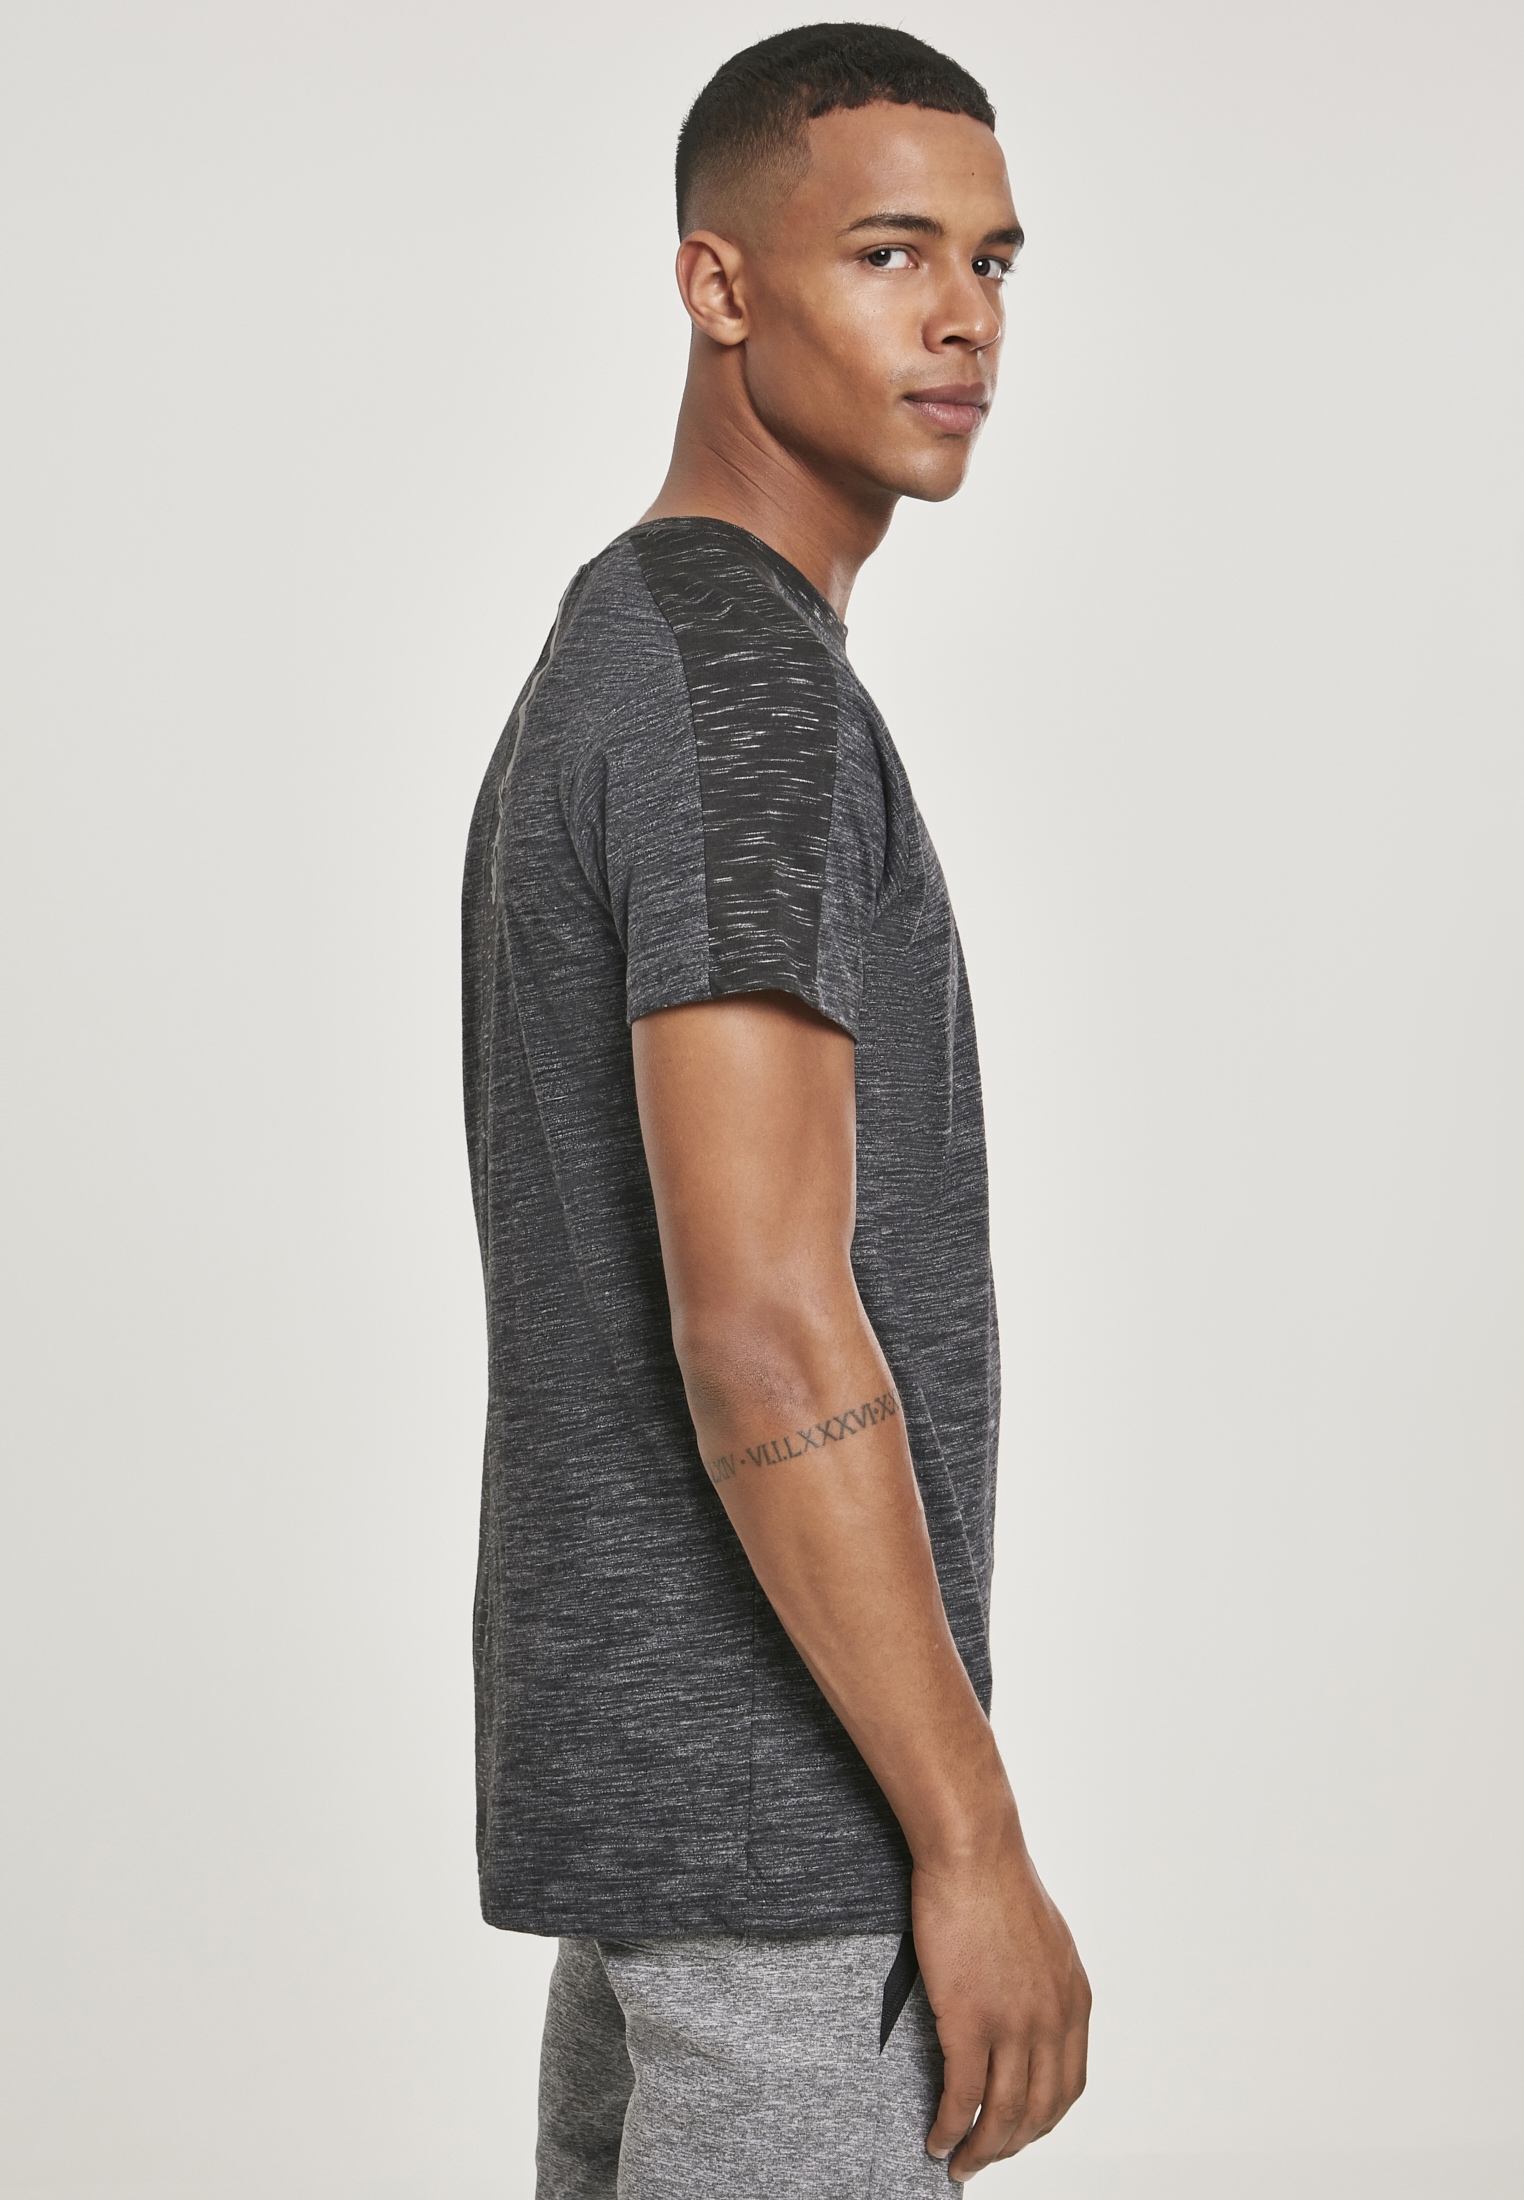 Southpole Shoulder Panel Tech Tee in Farbe marled charcoal